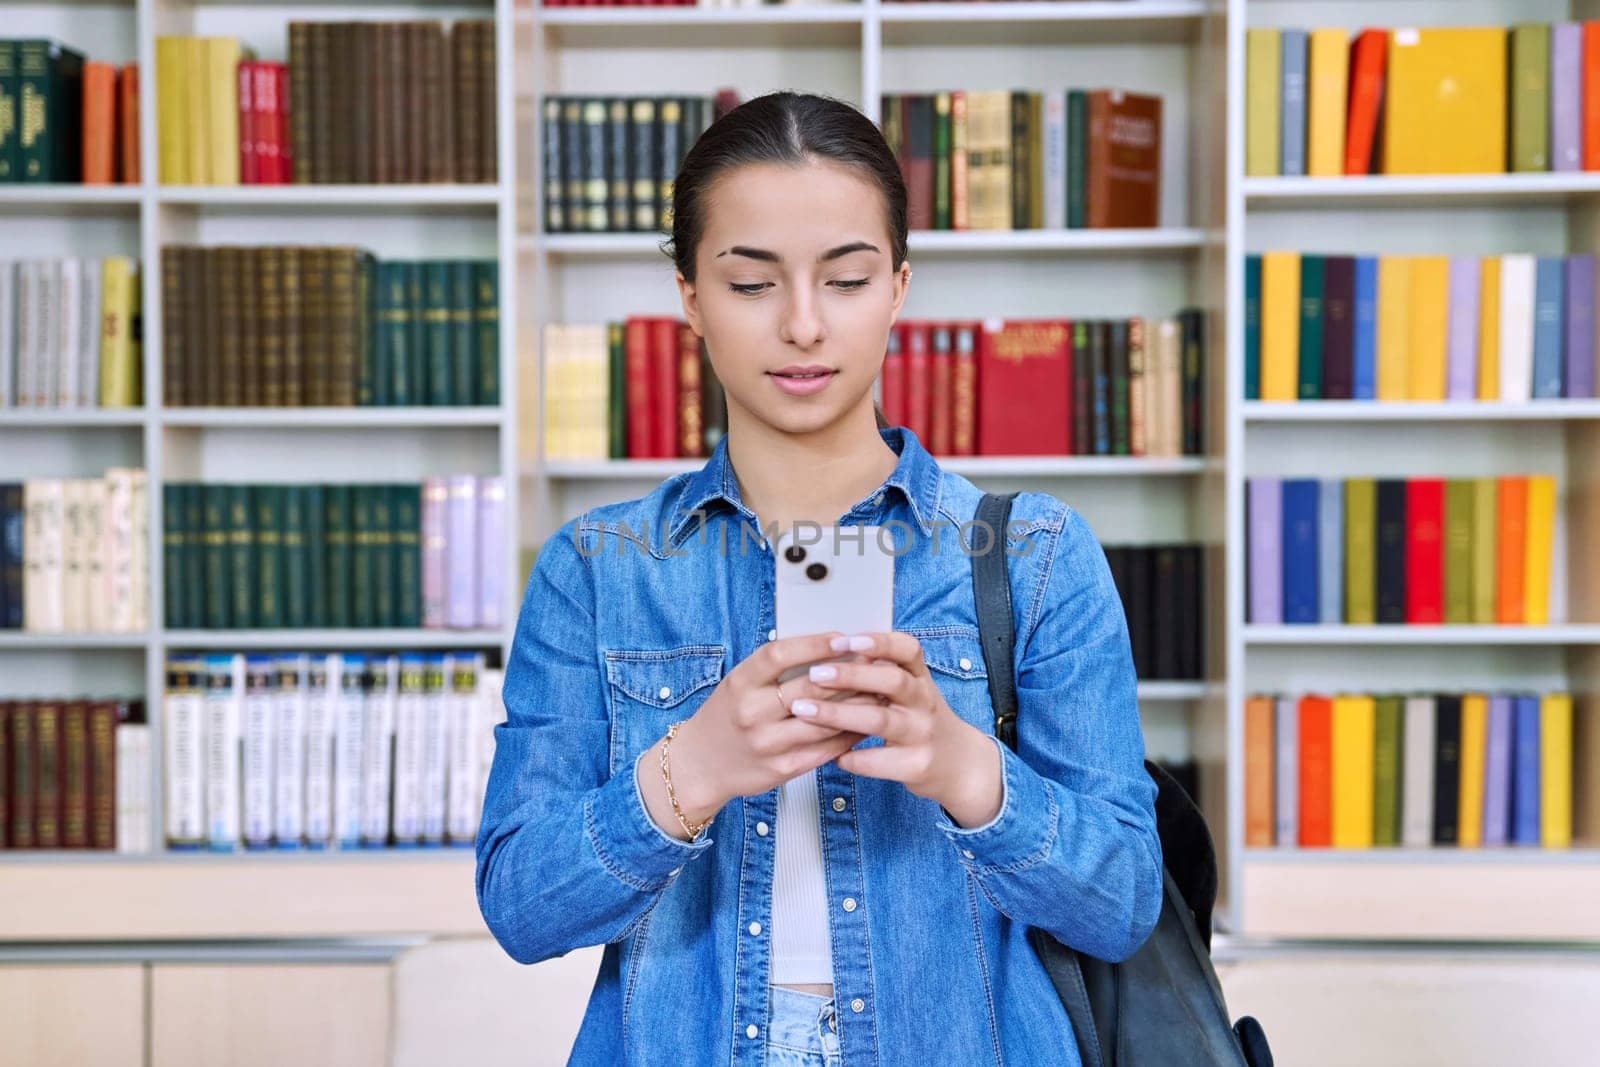 Teenage female student with backpack using smartphone, inside high school building, in library. Technologies, mobile educational apps applications, services, e-learning concept